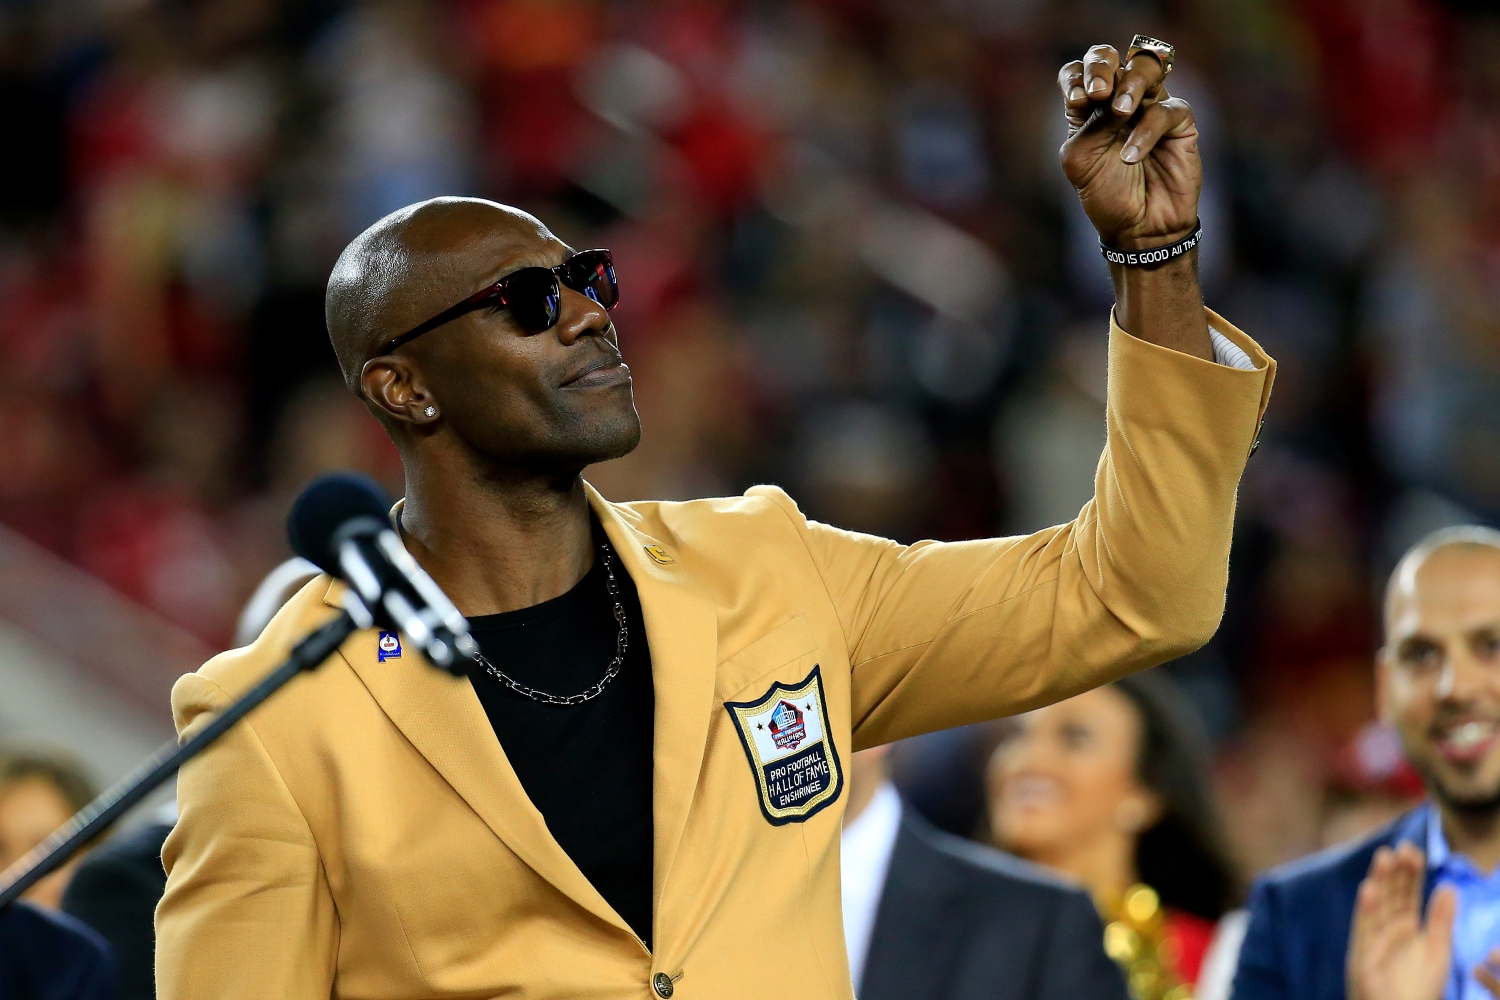 2018 Hall of Fame inductee Terrell Owens speaks during a ceremony at halftime of the game between the San Francisco 49ers and the Oakland Raiders.